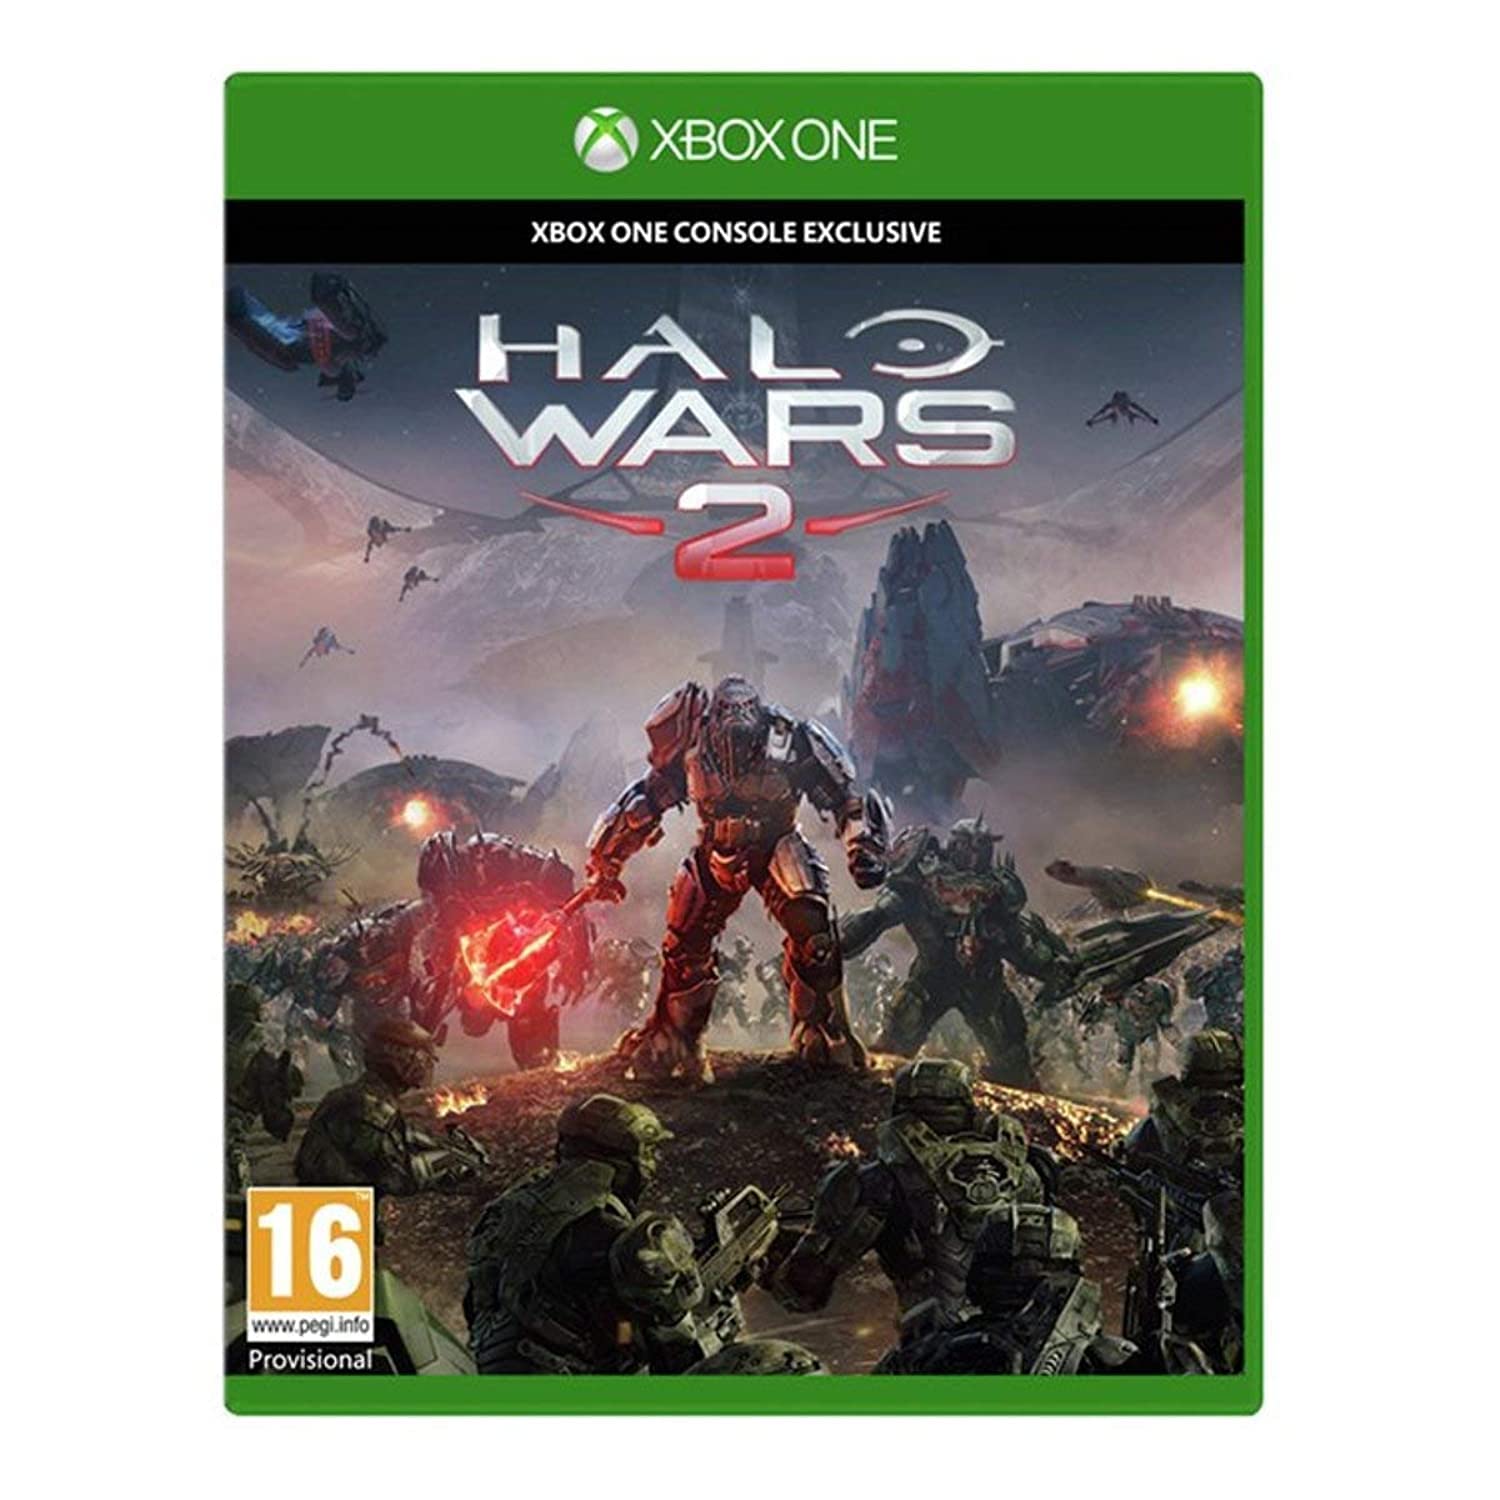 Xbox-One-Halo-wars-2-tech-junction-store